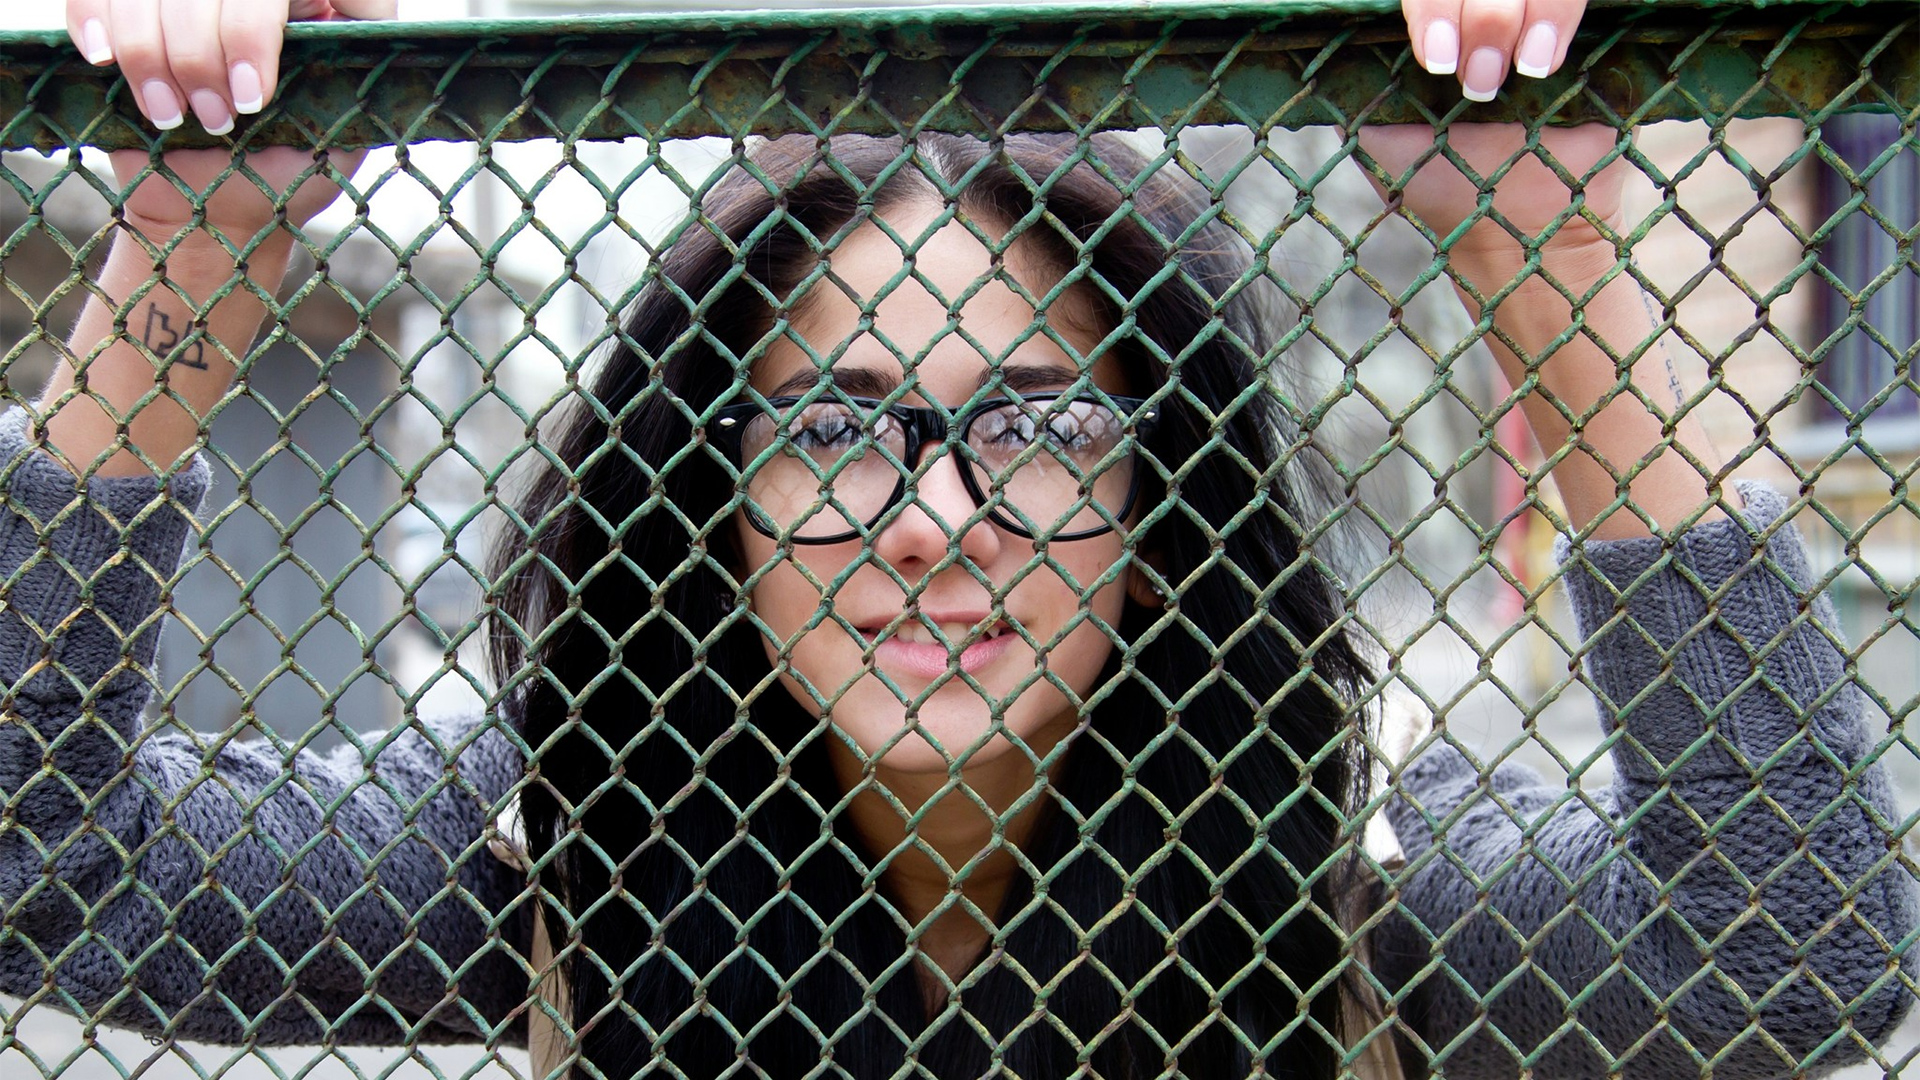 People 1920x1080 women model Malina A black hair glasses biting lips chain-link fence fence sweater closeup